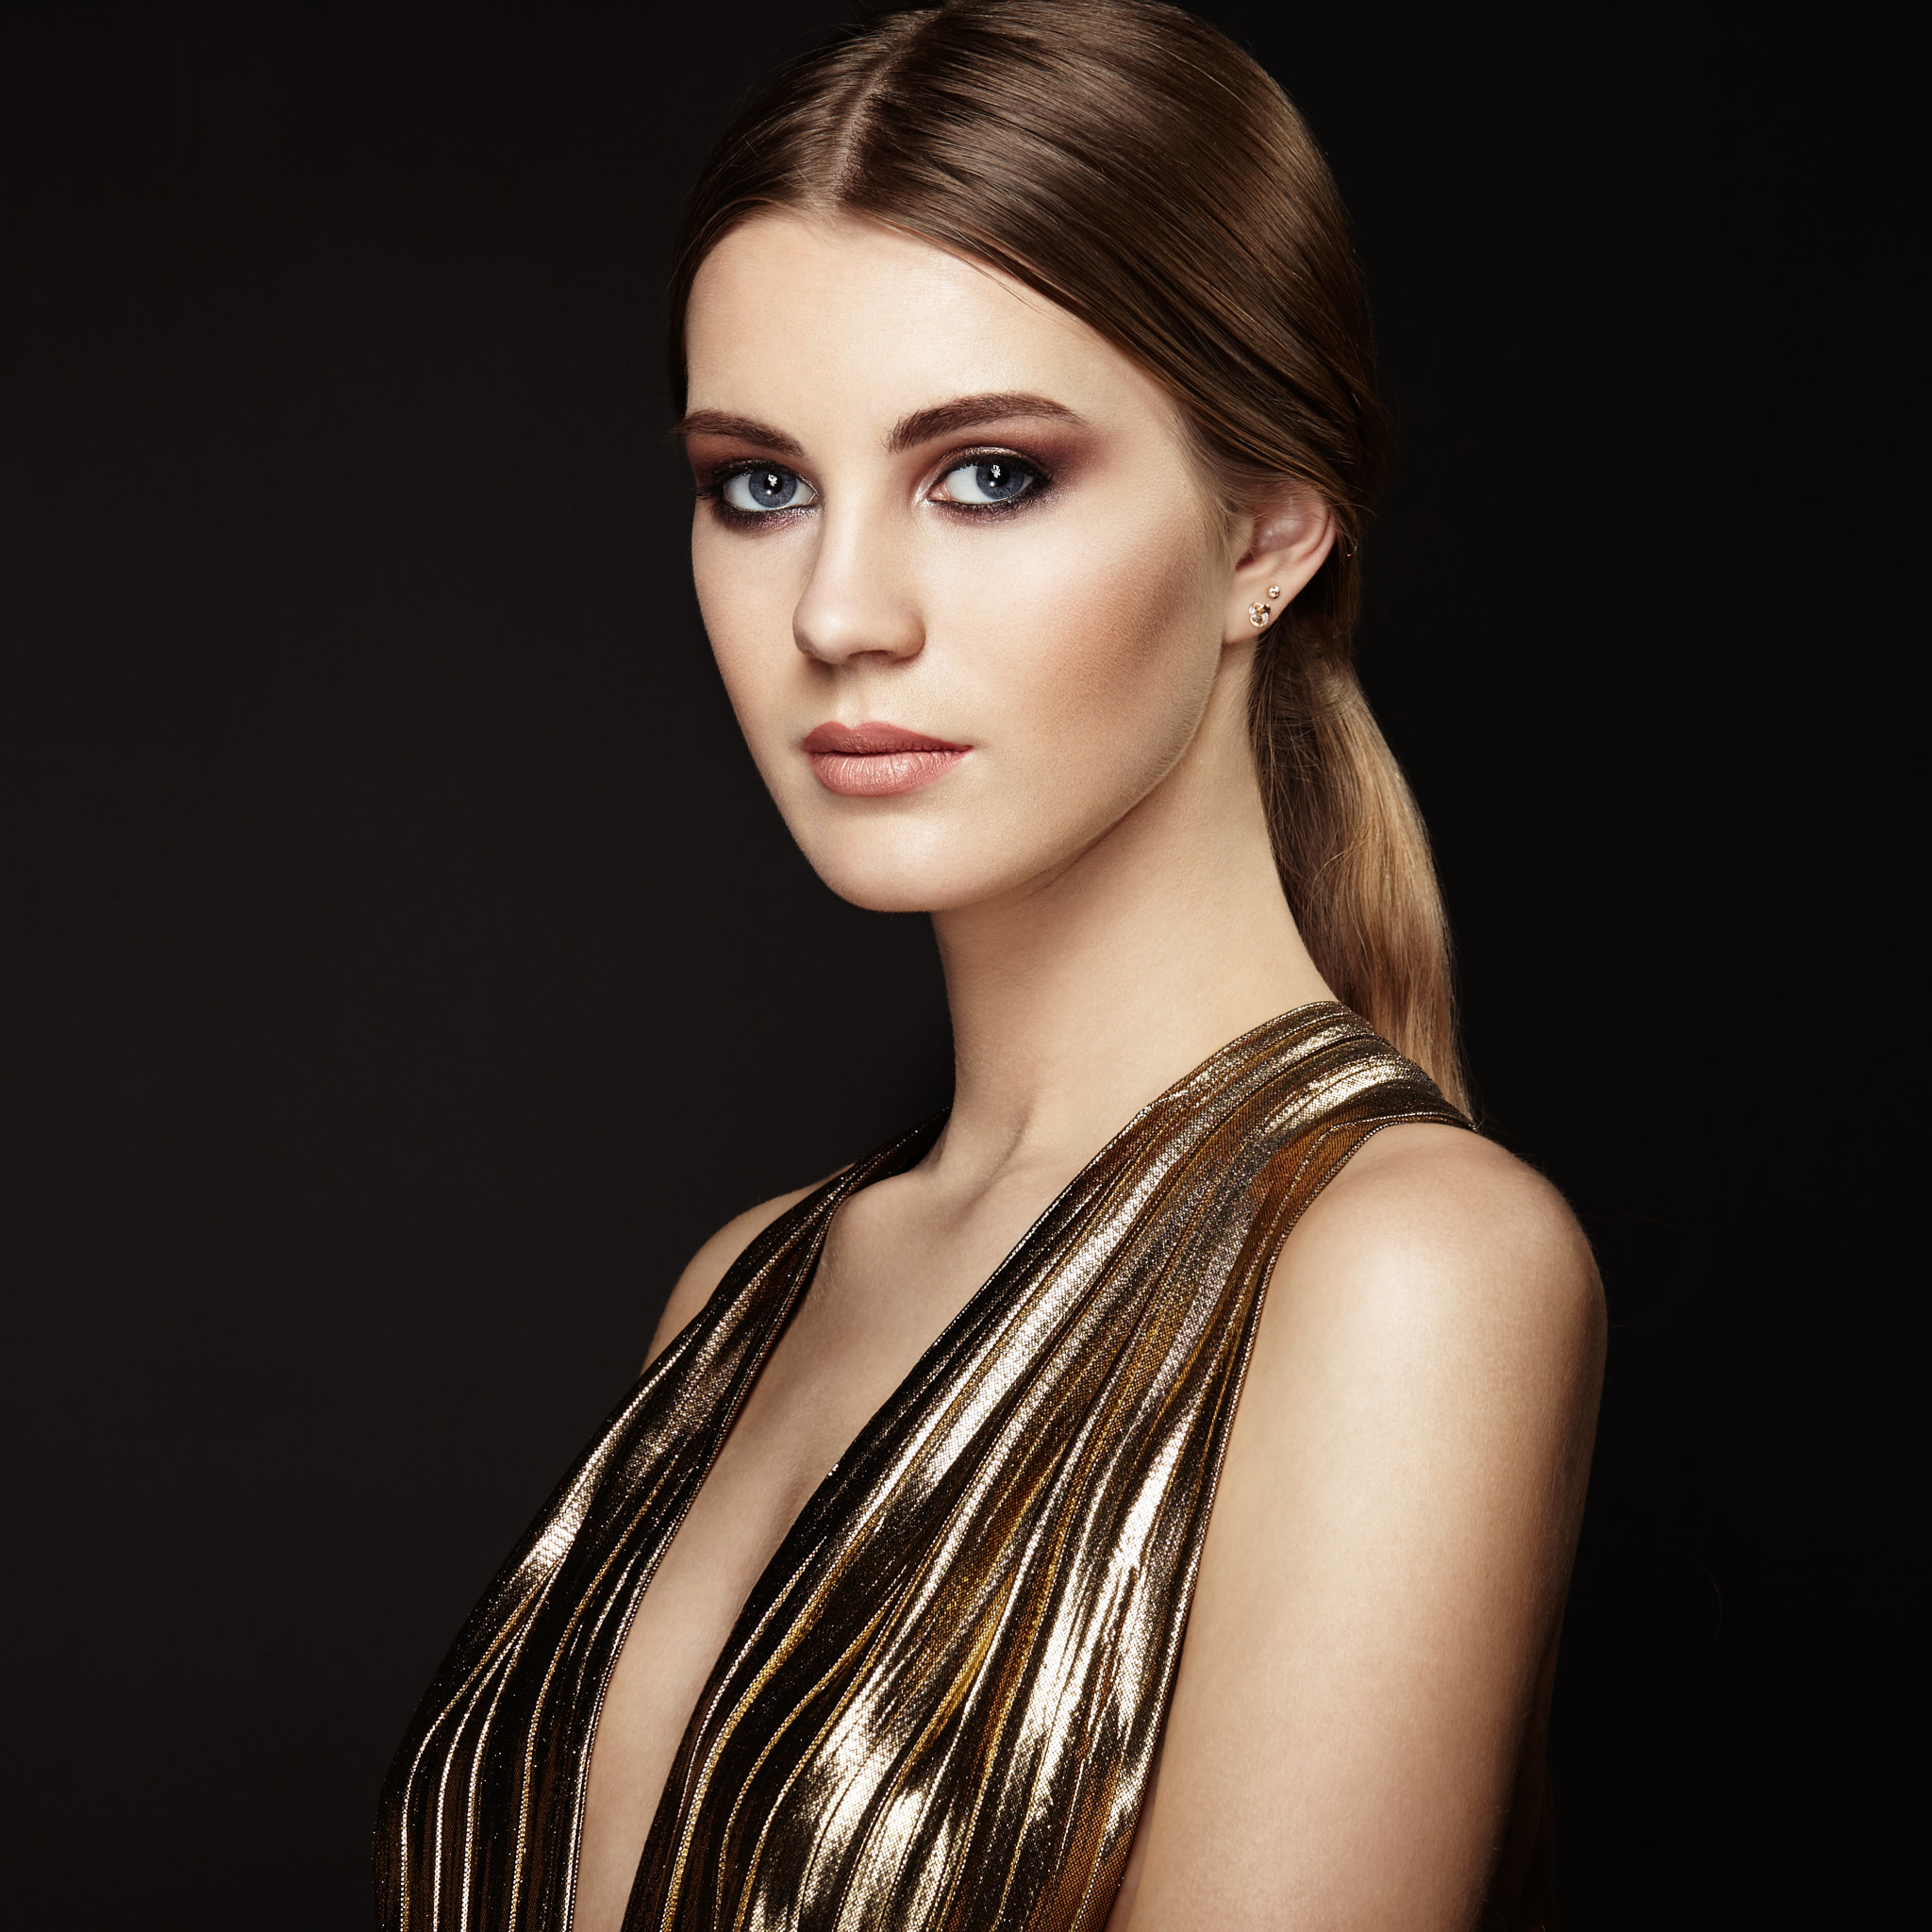 Fashion portrait of young beautiful woman in gold dress